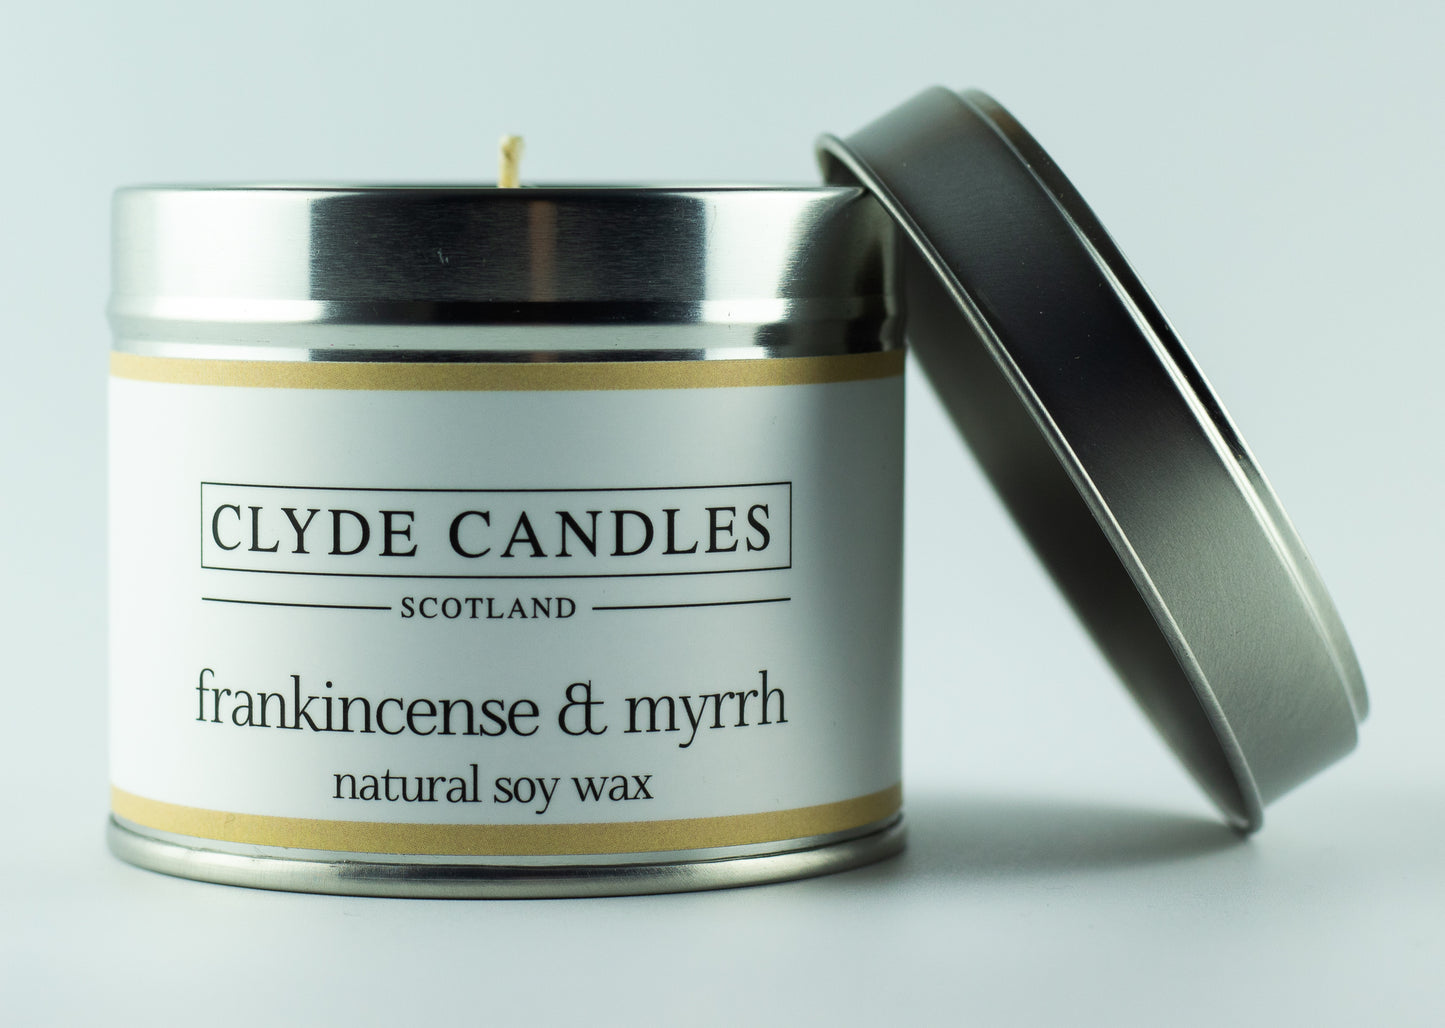 Frankincense & Myrrh Scented Candle Tin, Natural soy wax, Scottish luxury Gift Candles, Clyde Candles